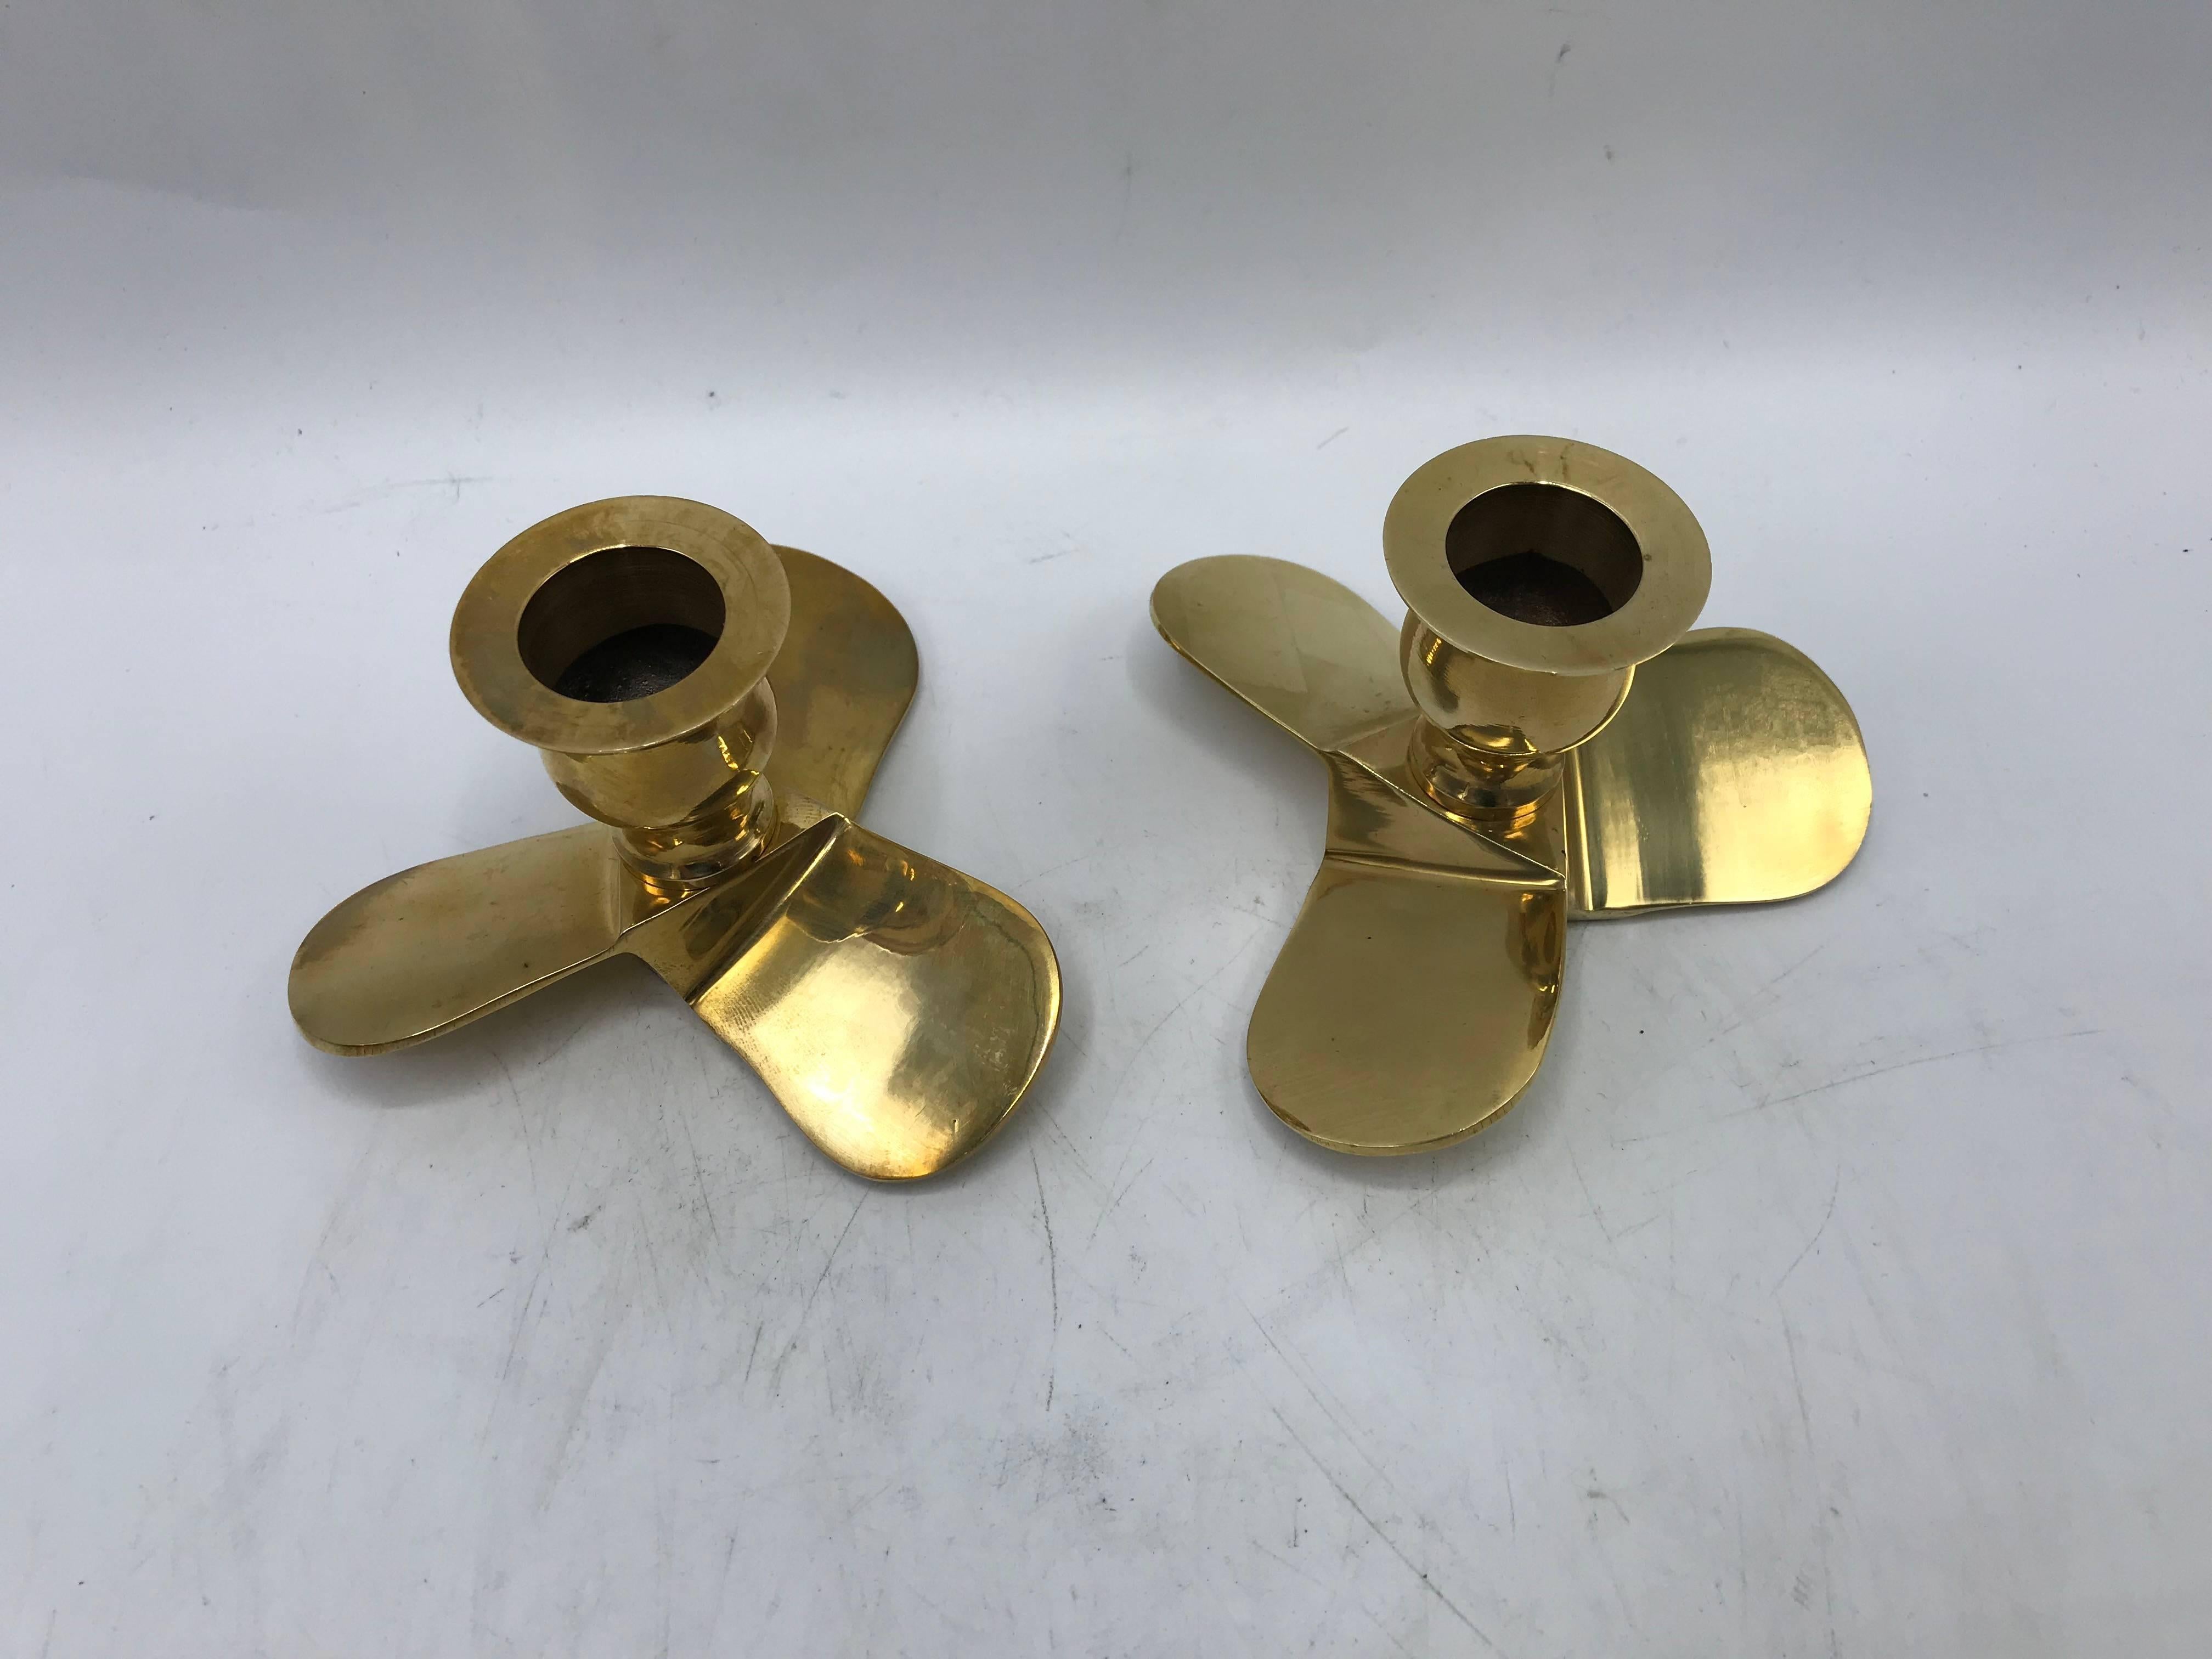 Polished 1970s Italian Brass Boat Propeller Candlestick Holders, Pair